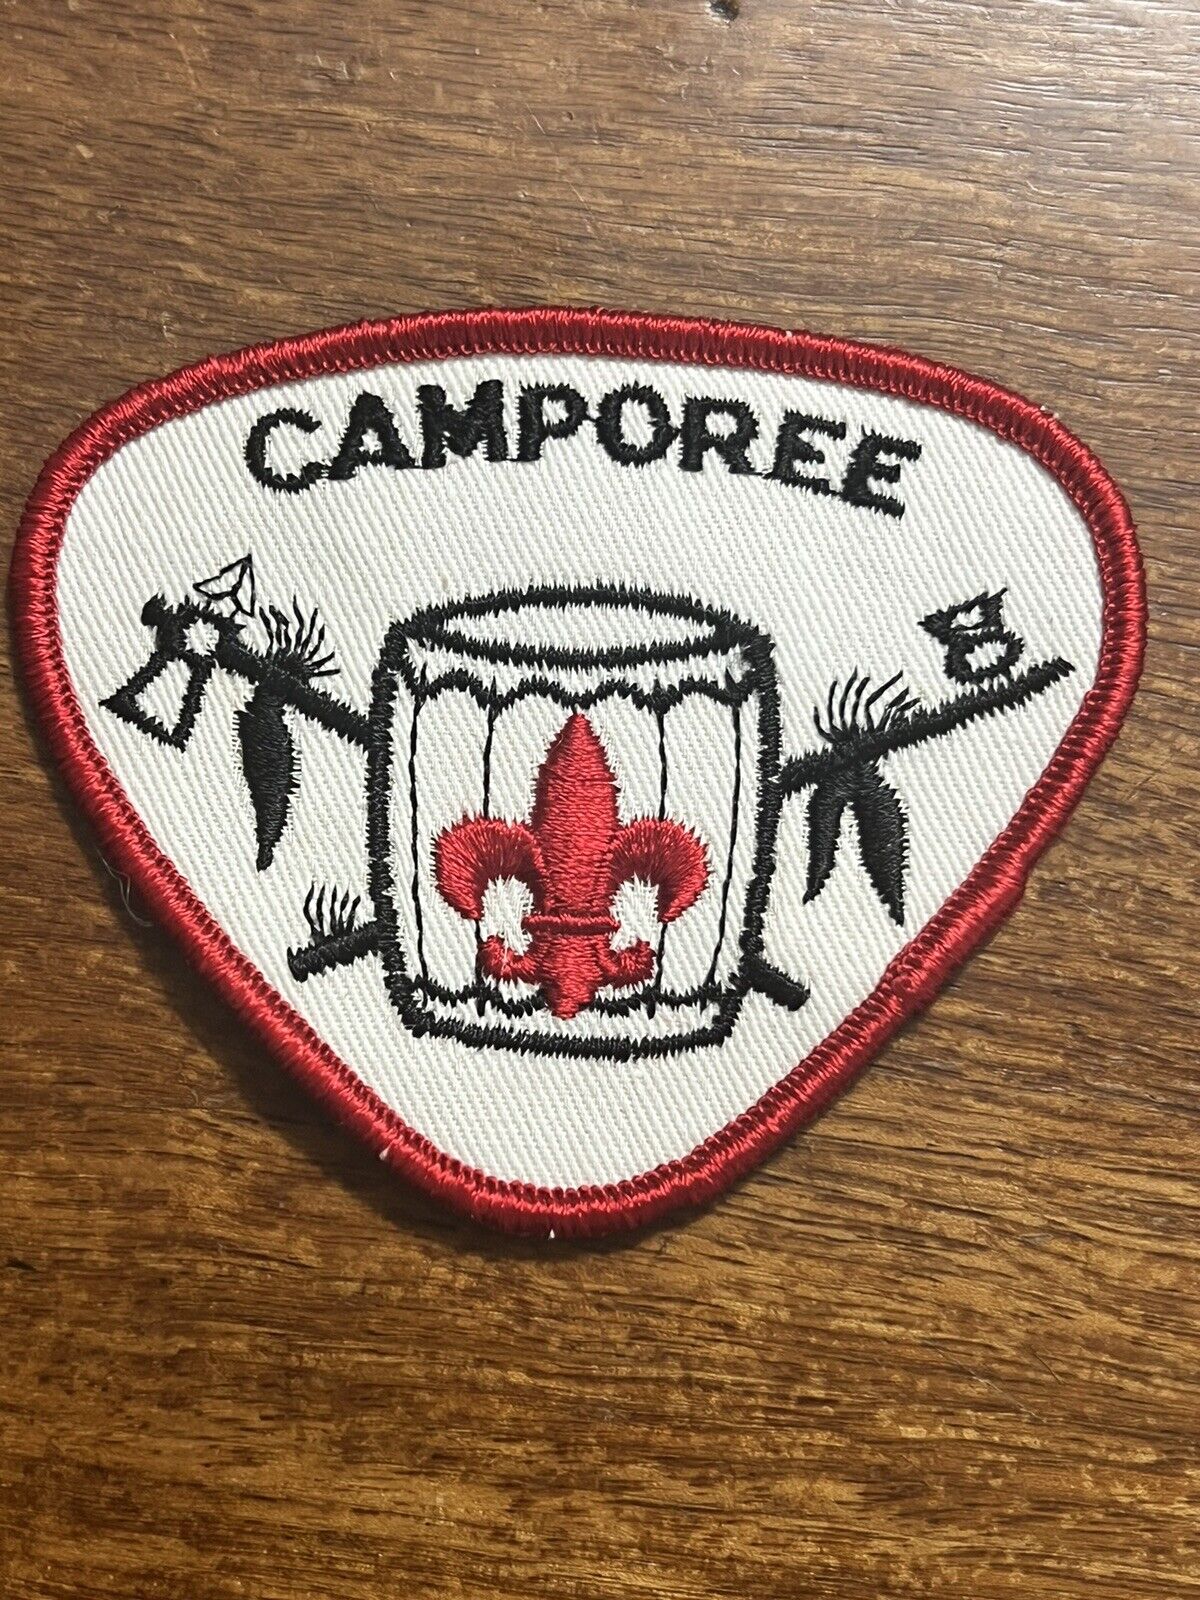 Camporee Drum Generic BSA Scouts Red White Activity Patch